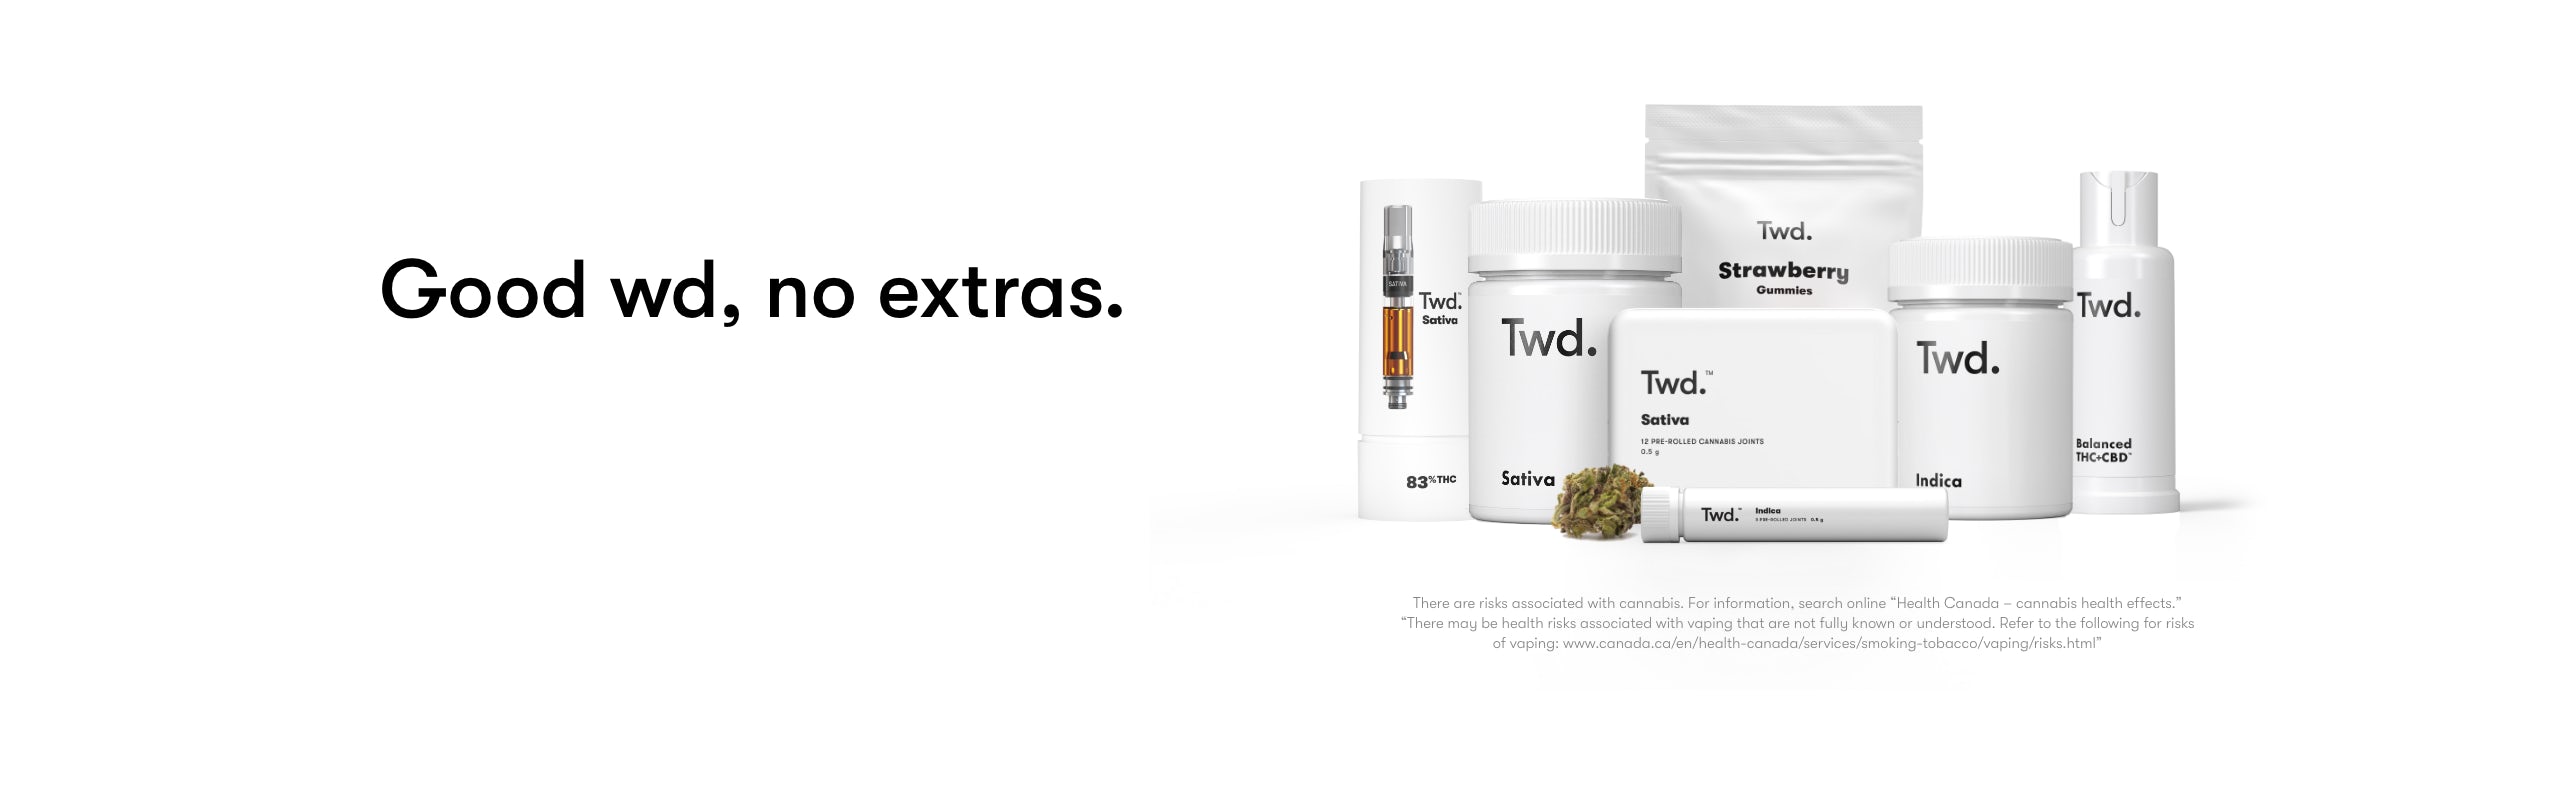 twd-featured-products-details-weedmaps